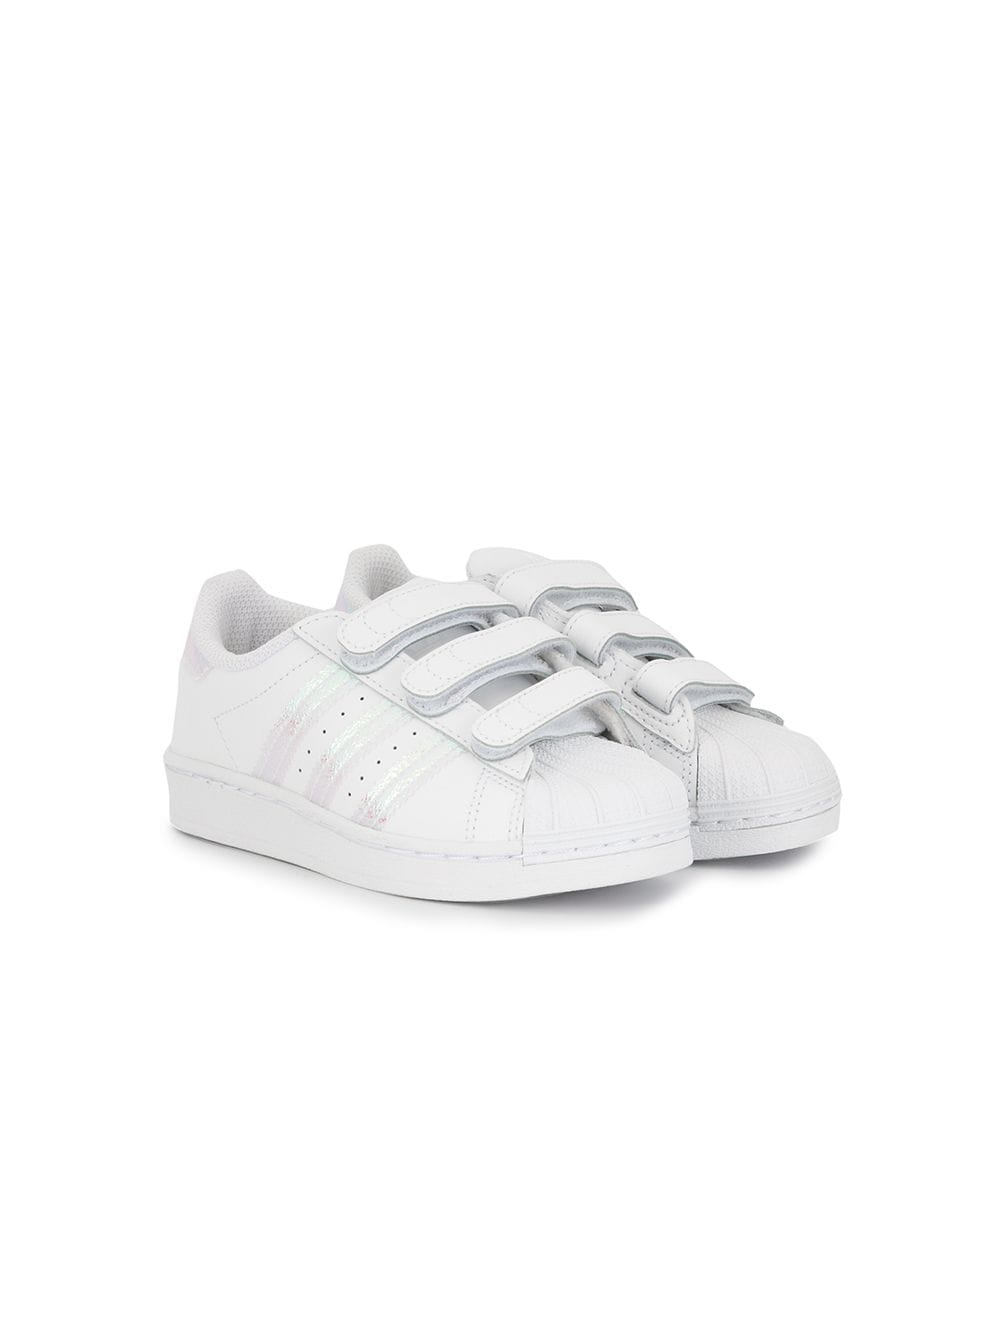 adidas youth trainers